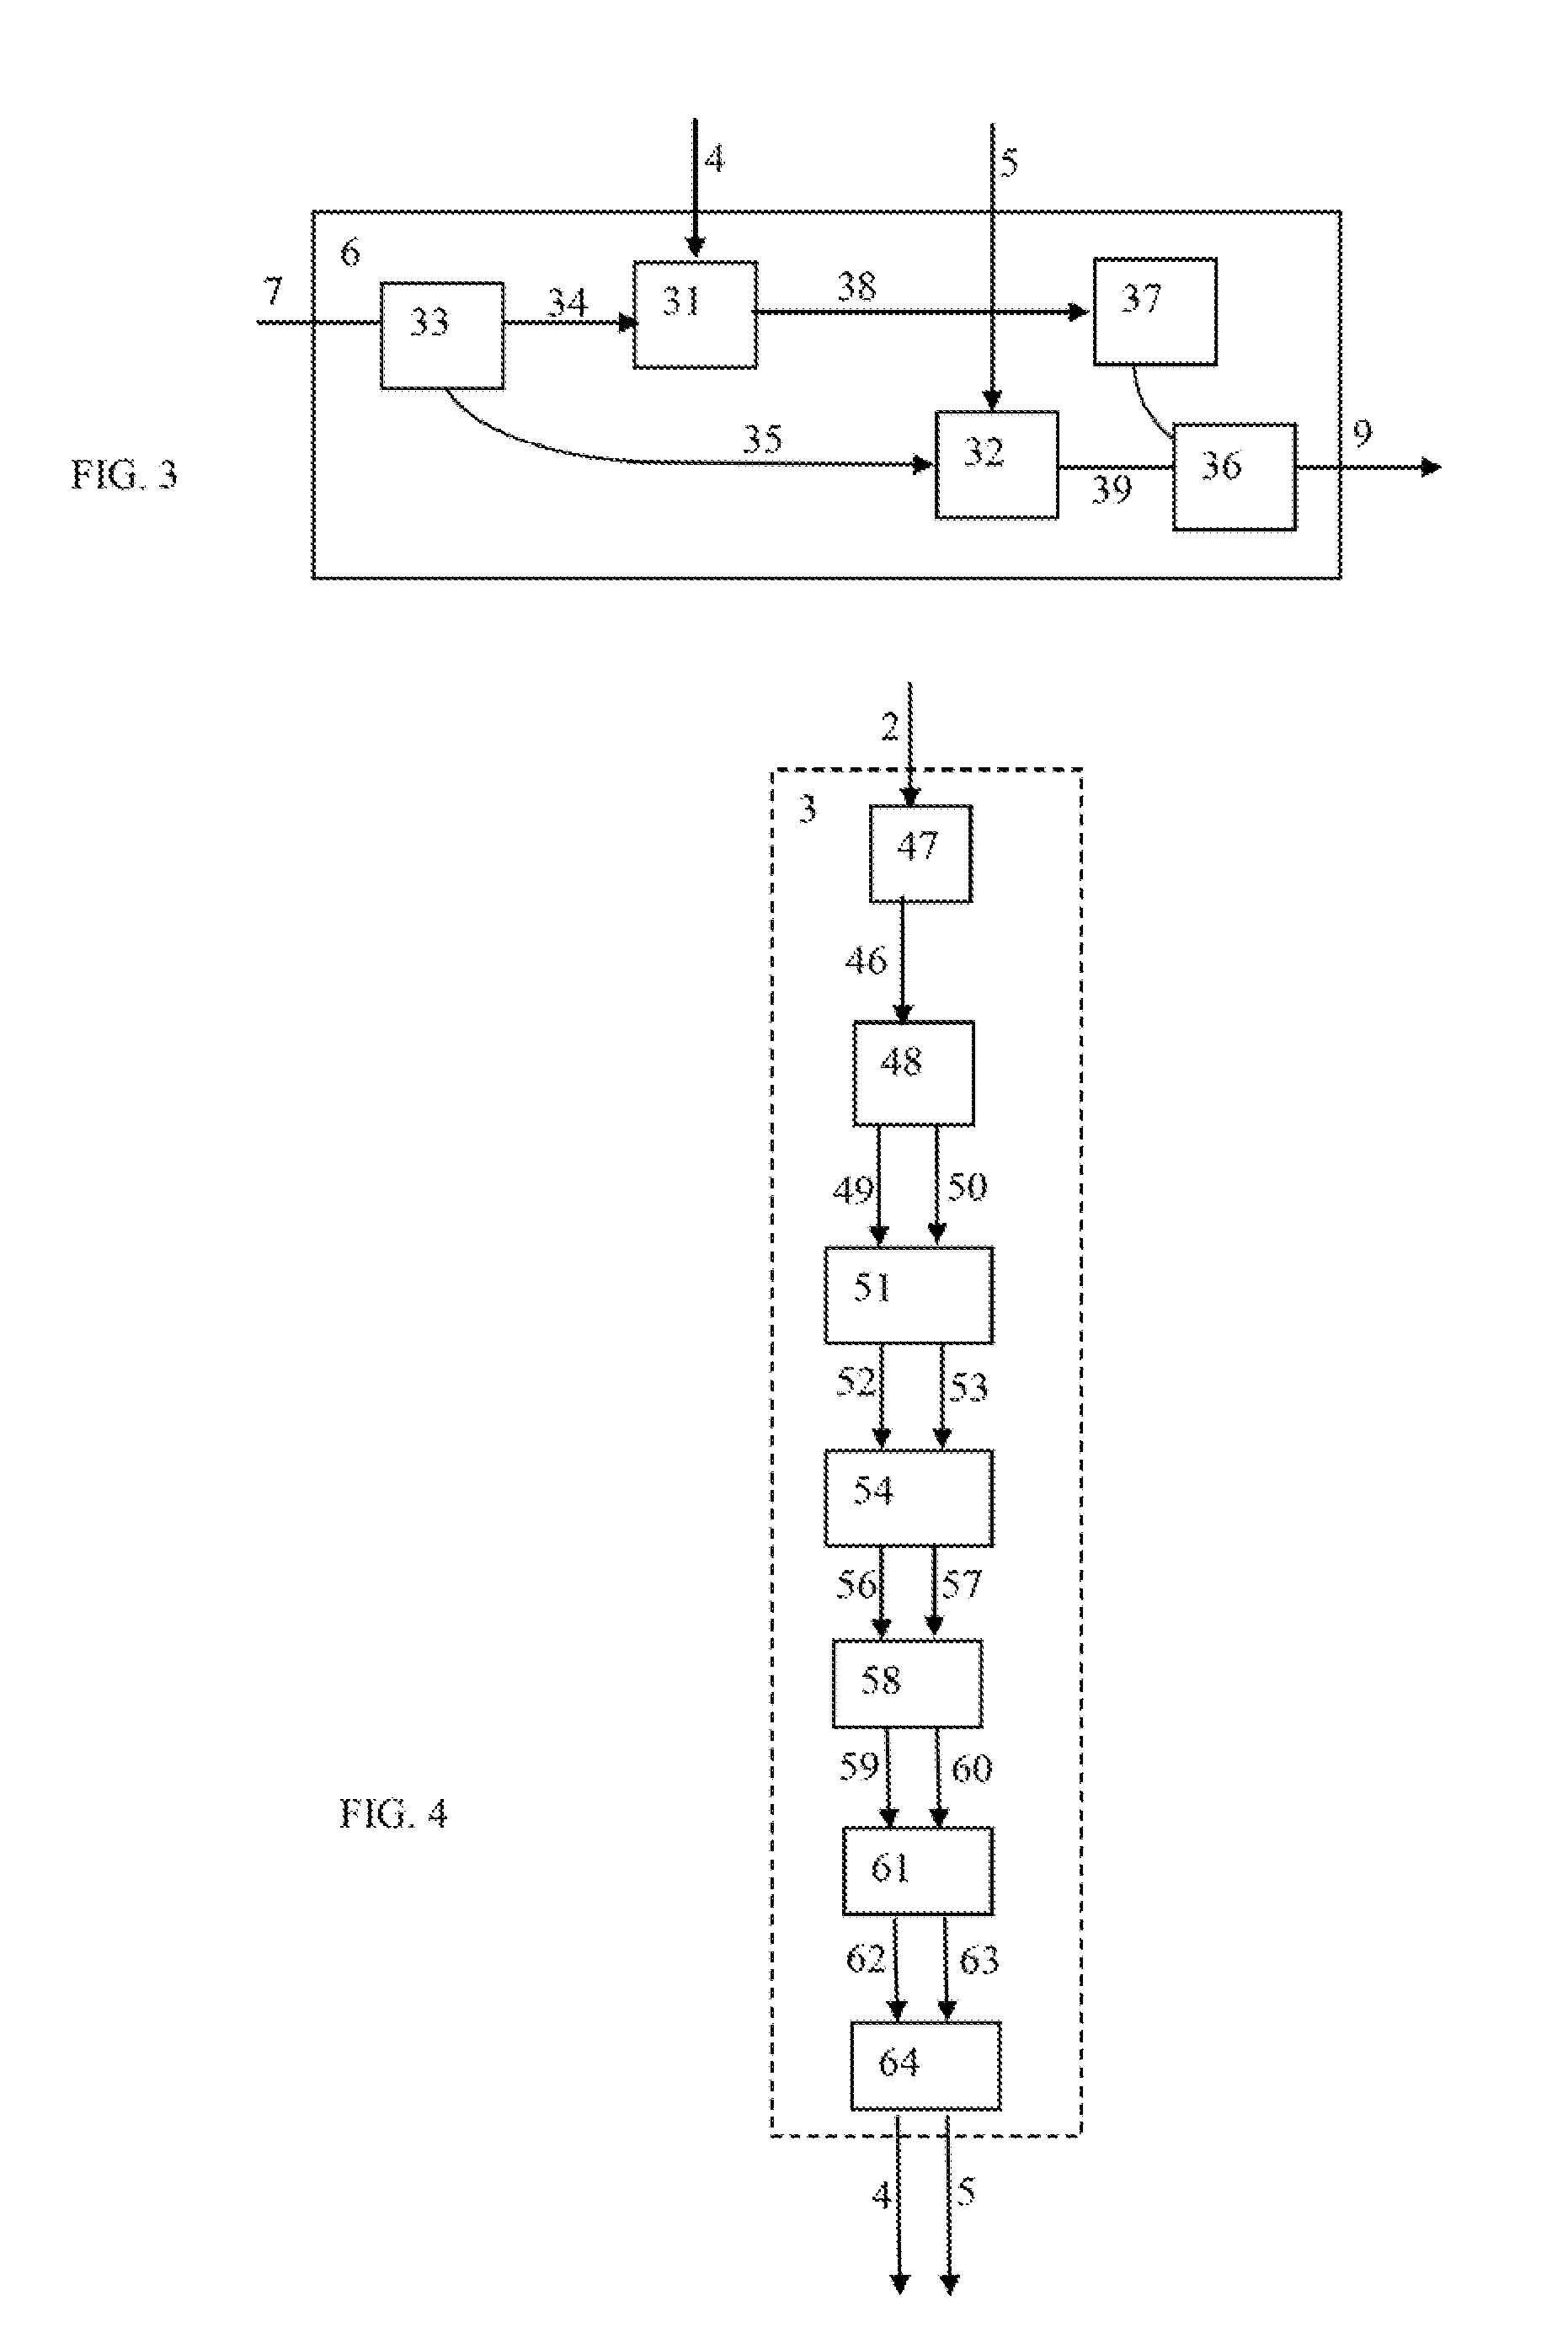 Secure orthogonal frequency multiplexed optical communications